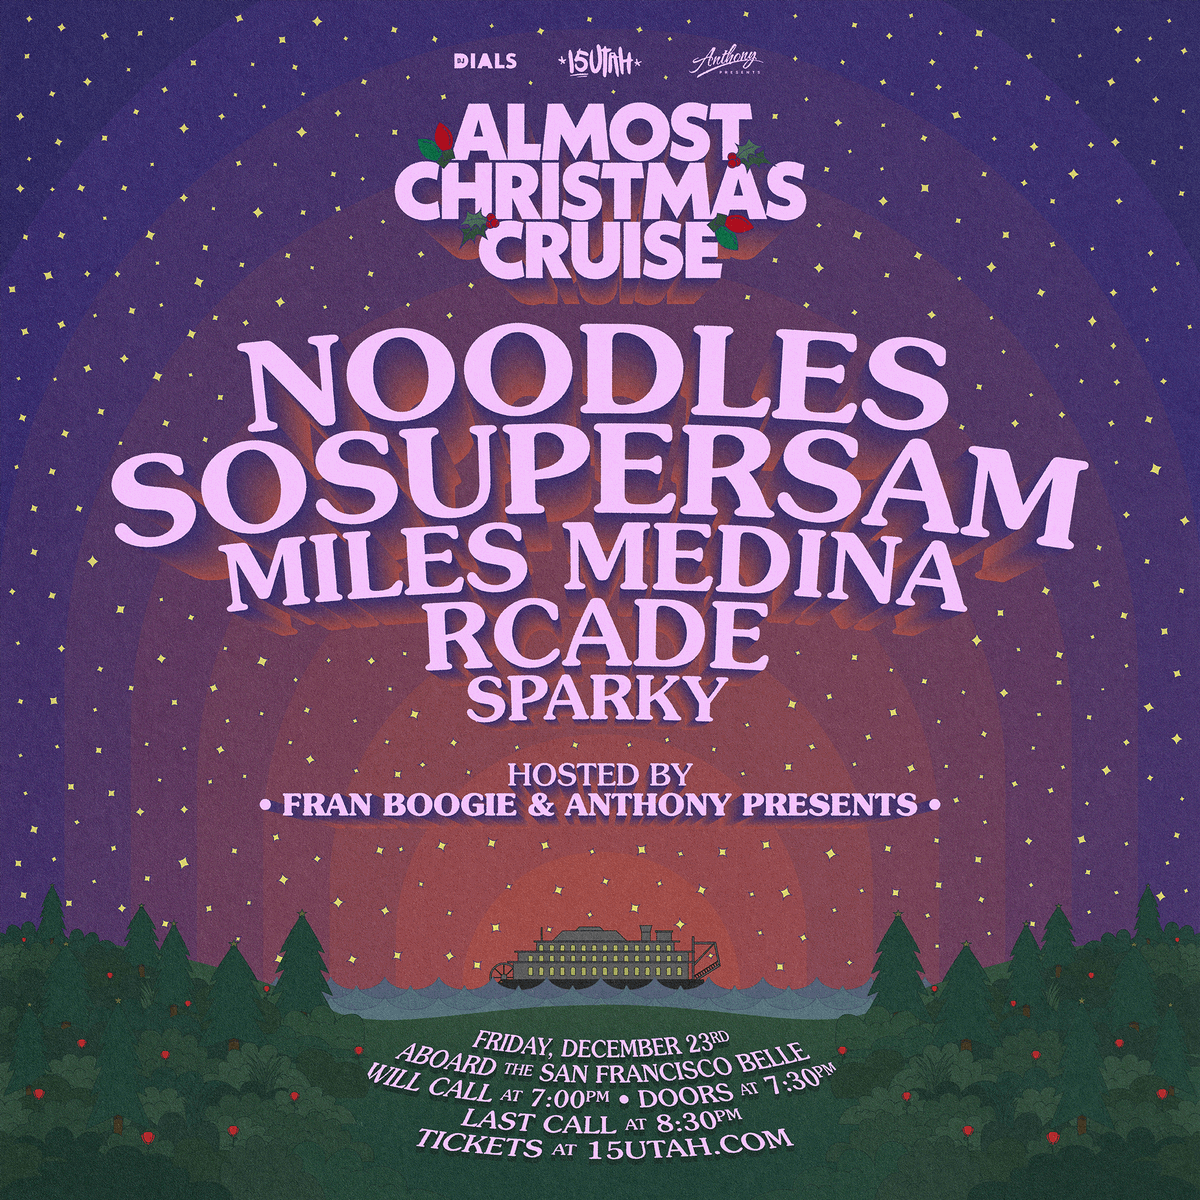 BAY AREA WE ARE COMING our annual christmas party returns on dec 23 and this time we are on a boat with a fire lineup 🛥 🎅🎄 we are so excited to do this special show for you guys @bbnoodz tickets are limited so get them while you can! almostchristmascruise.eventbrite.com